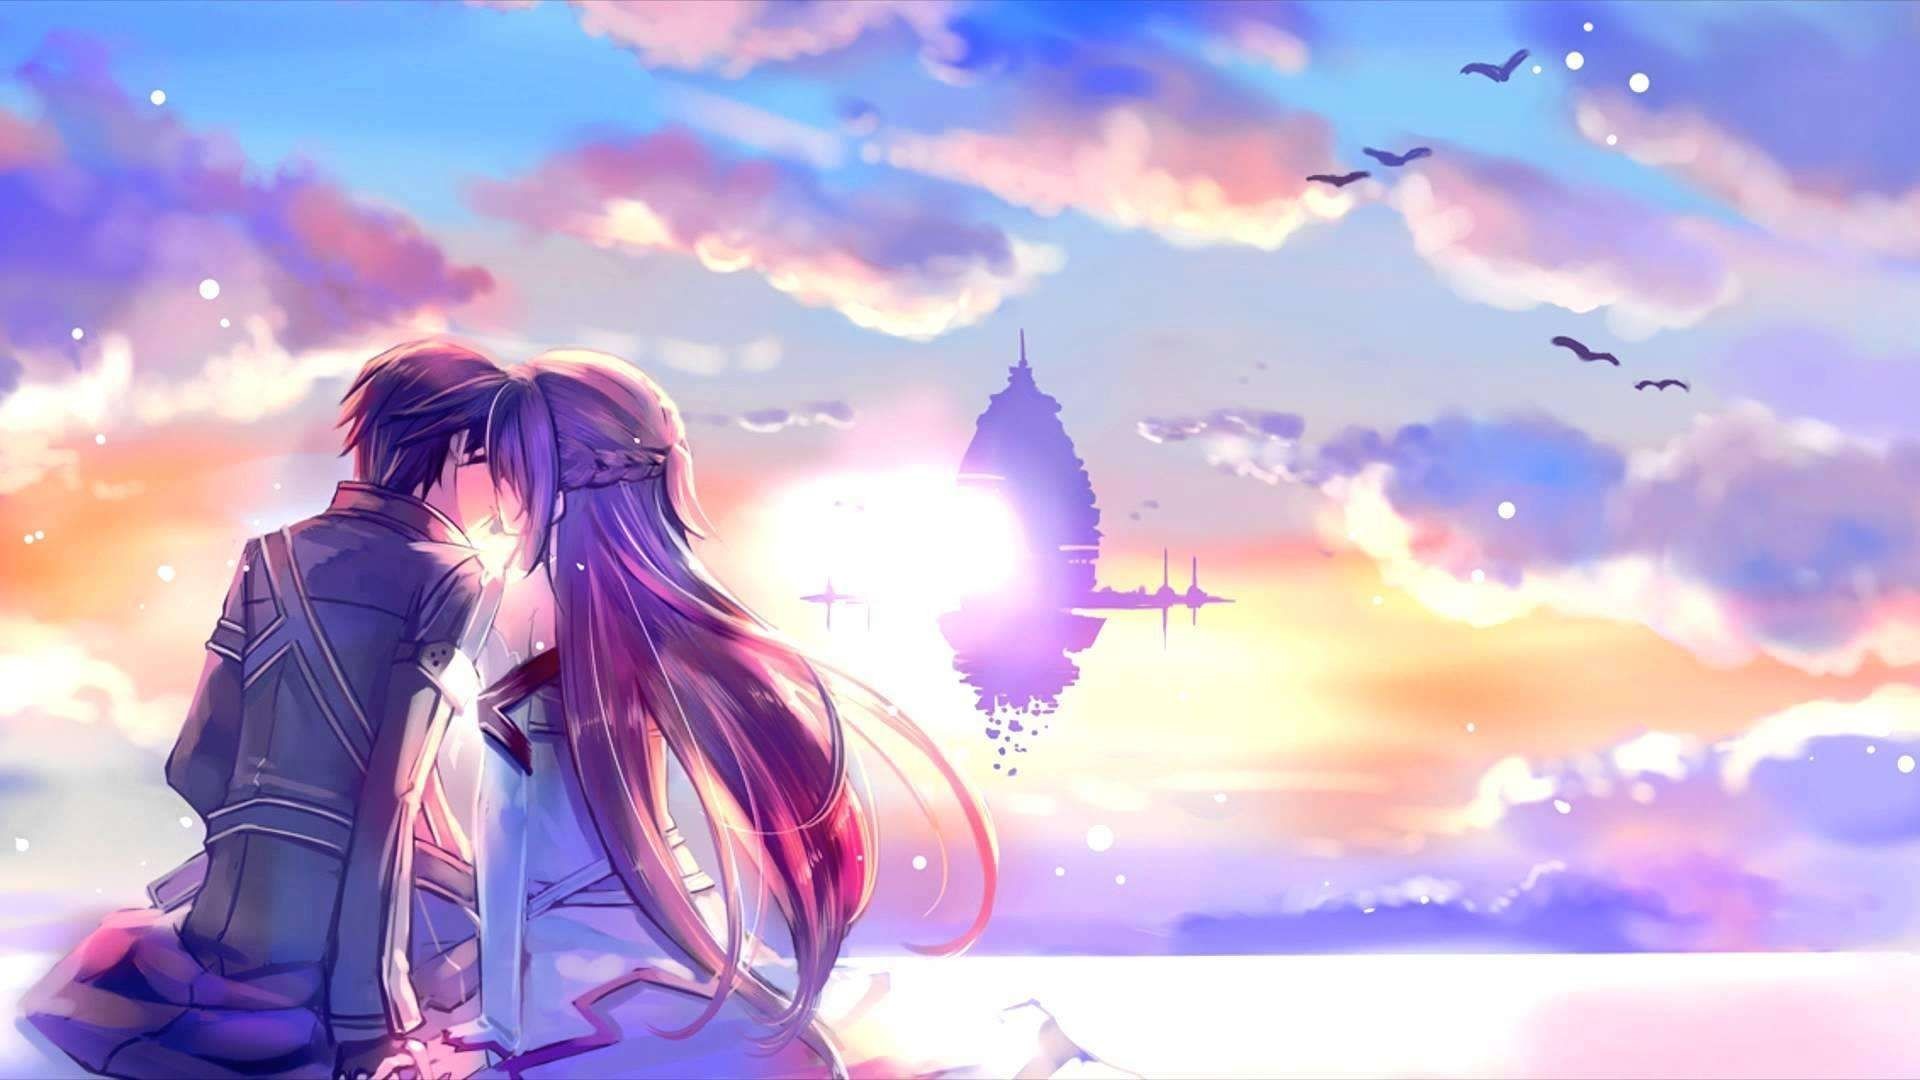 1920x1080  New Anime Love Wallpaper HD 1080p at HDWallWide.com. High  definition 25071 of Anime